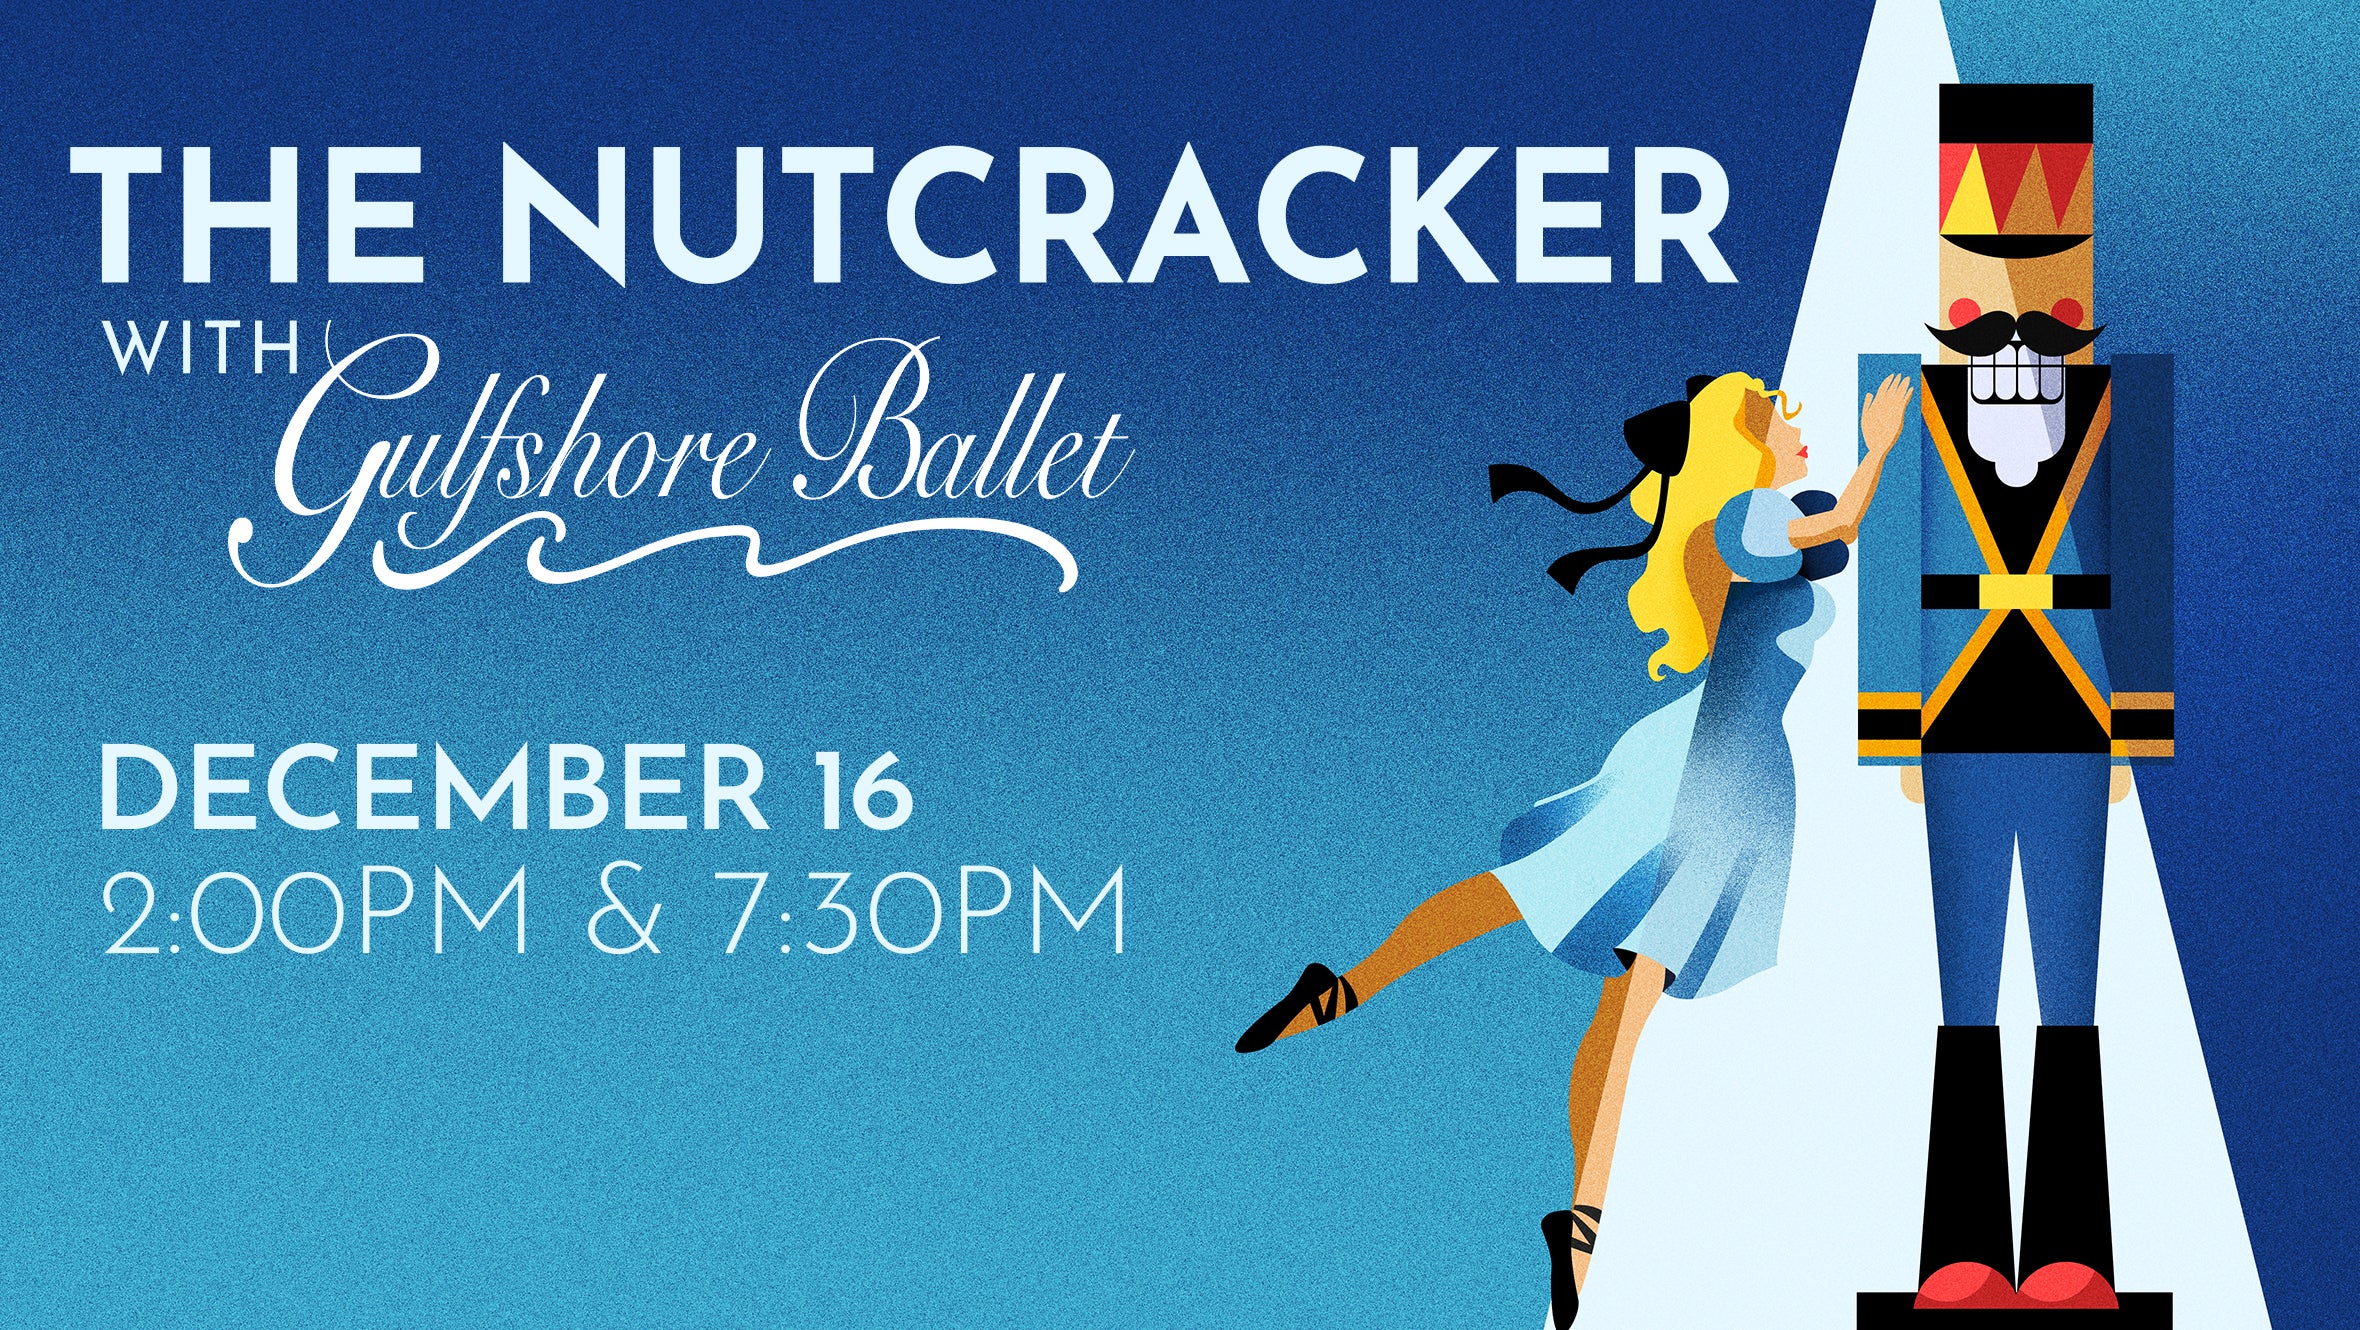 The Nutcracker with Gulfshore Ballet